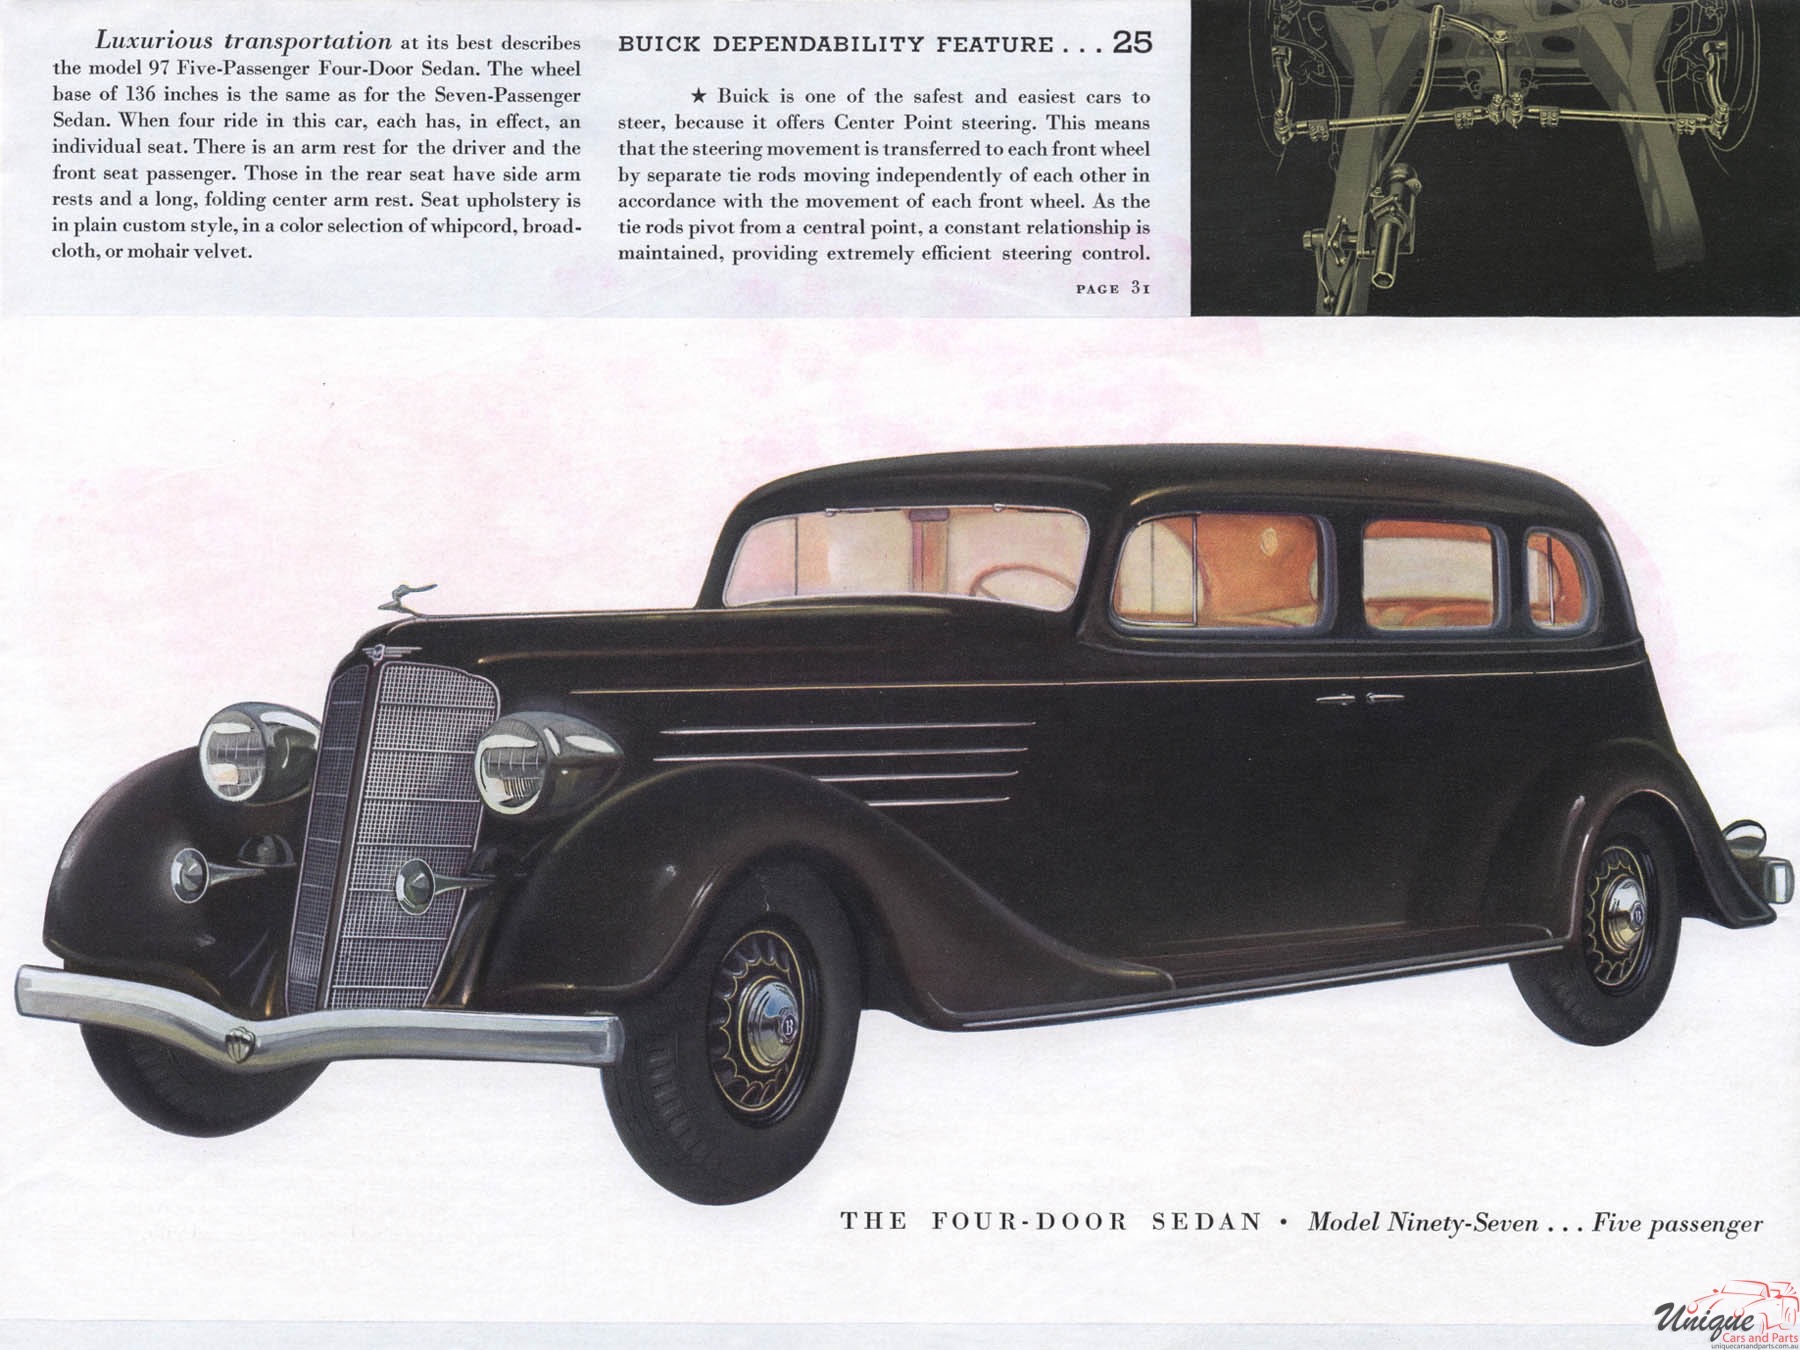 1935 Buick Brochure Page 34